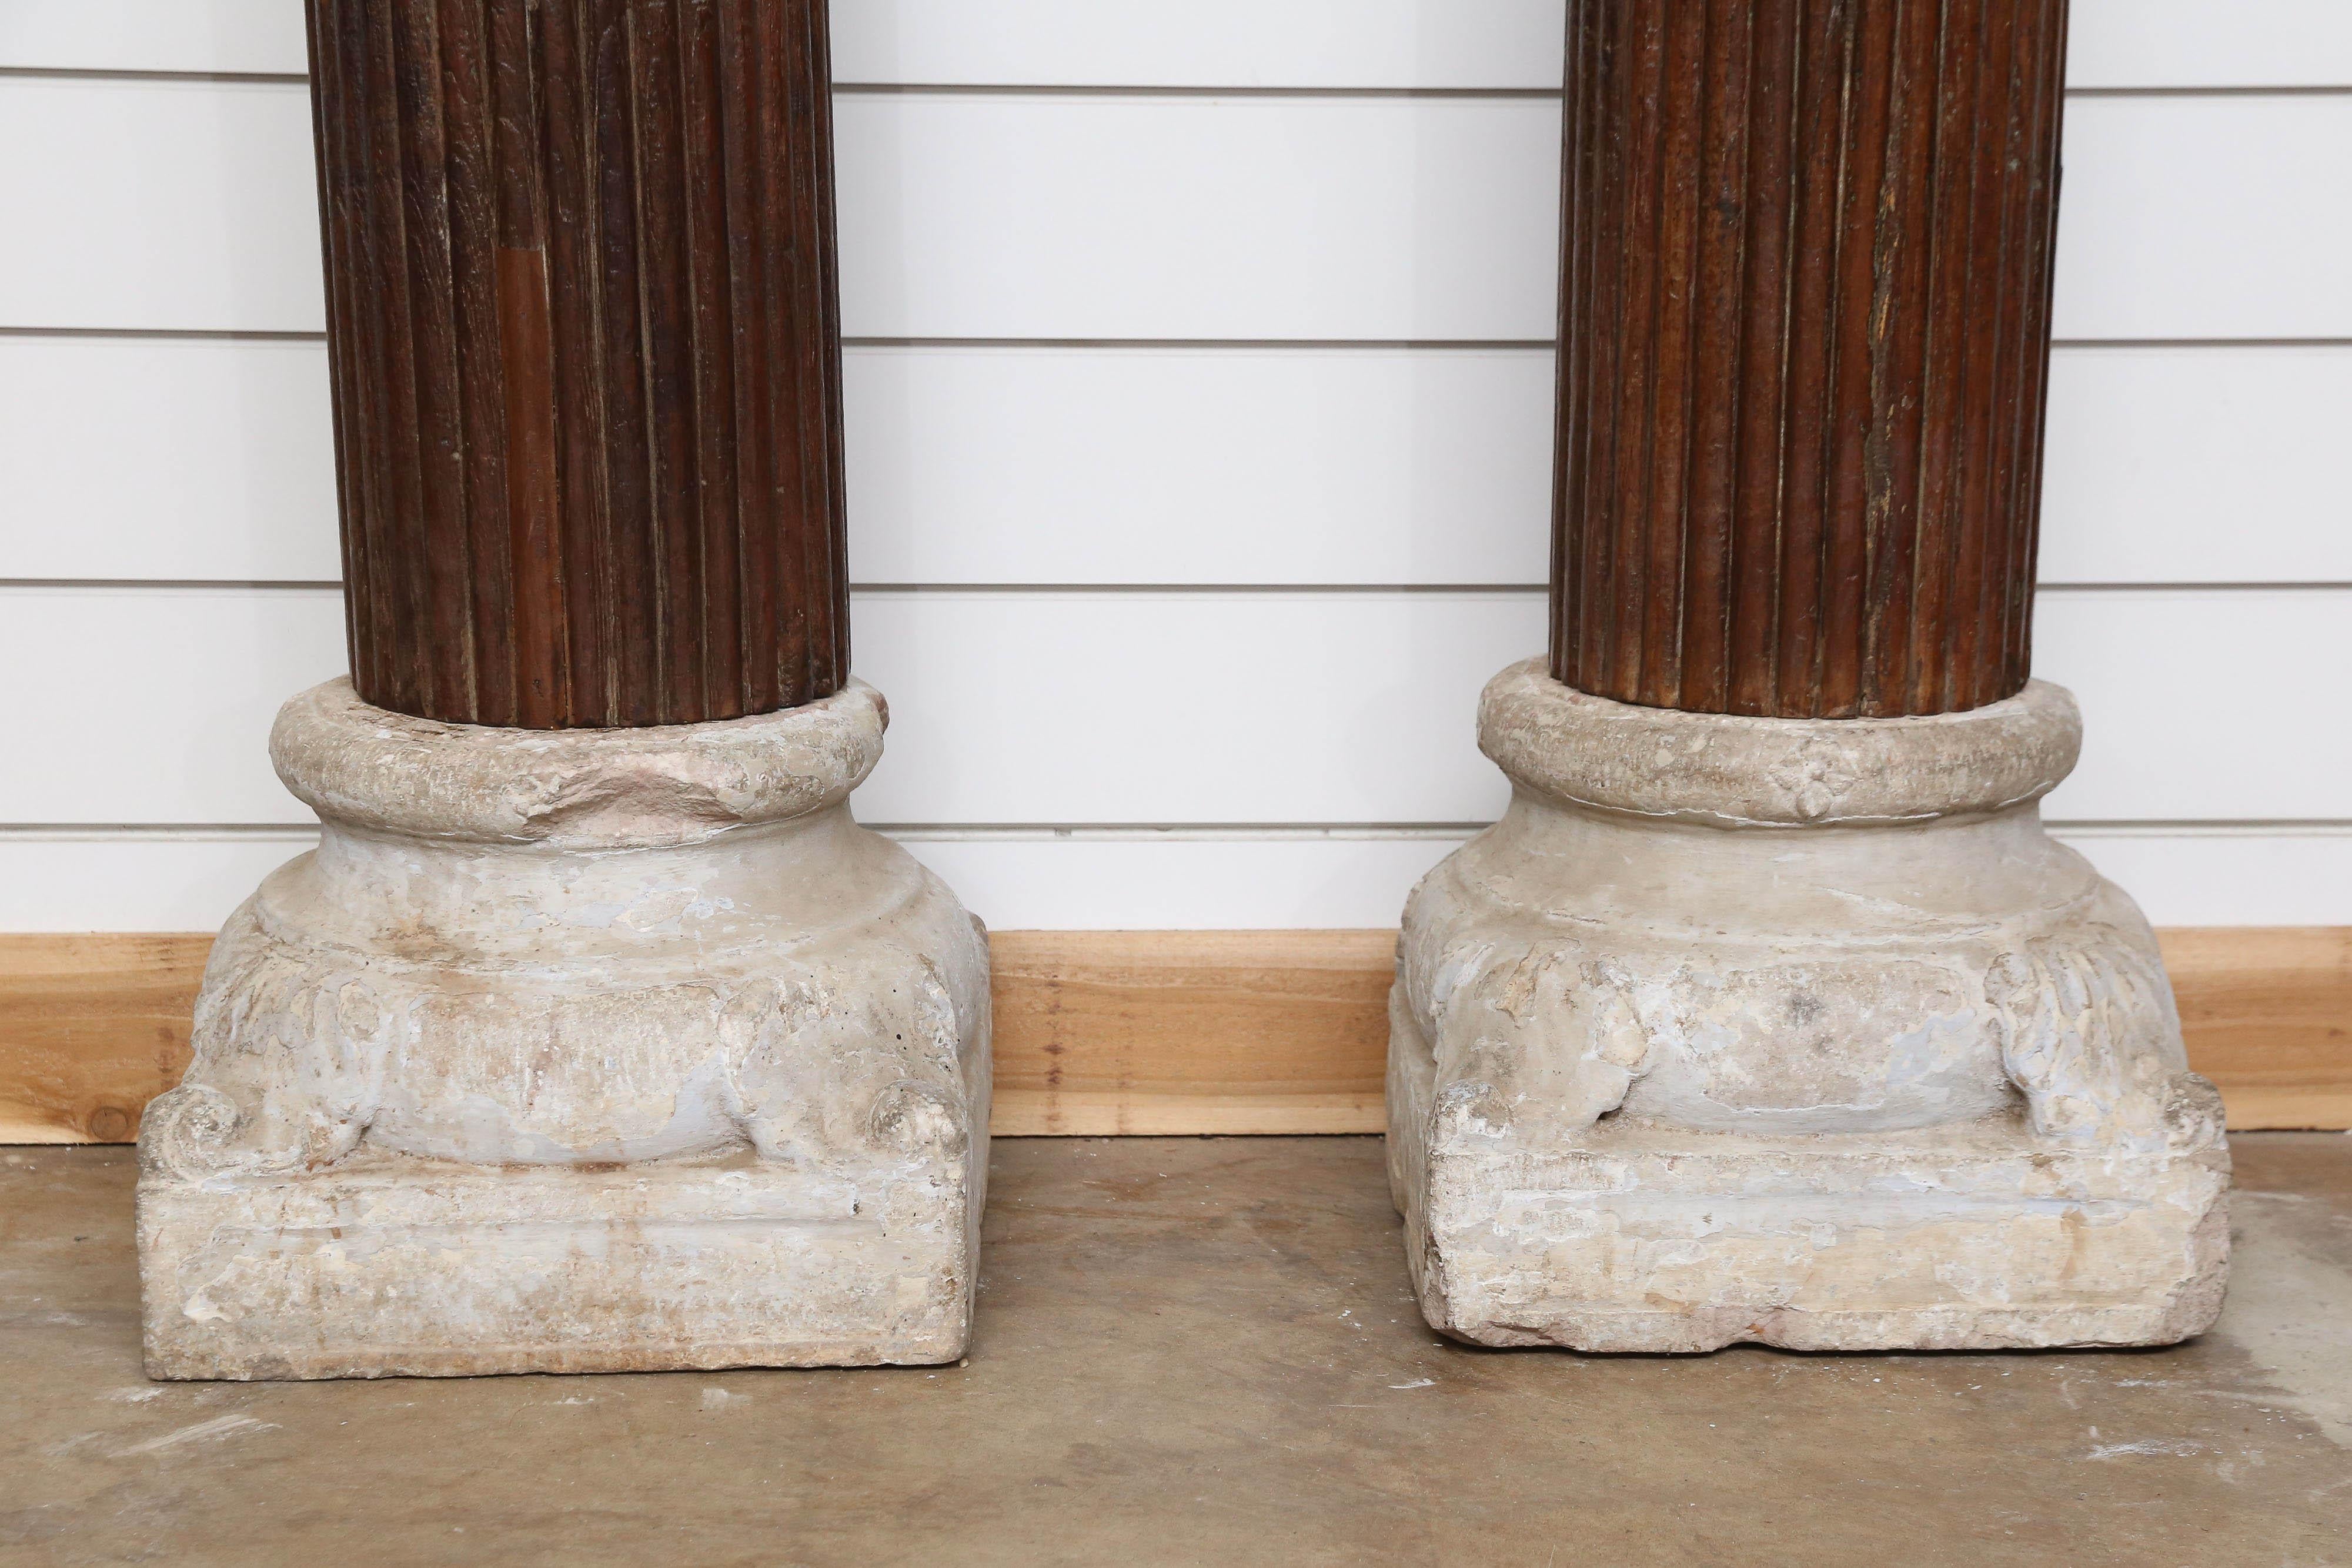 These columns once supported a huge three storied mansion. These were made of best quality teak wood. The wood is so hard and heavy it looks and feels like iron. It was a great engineering feat for to make the four perfect large round columns